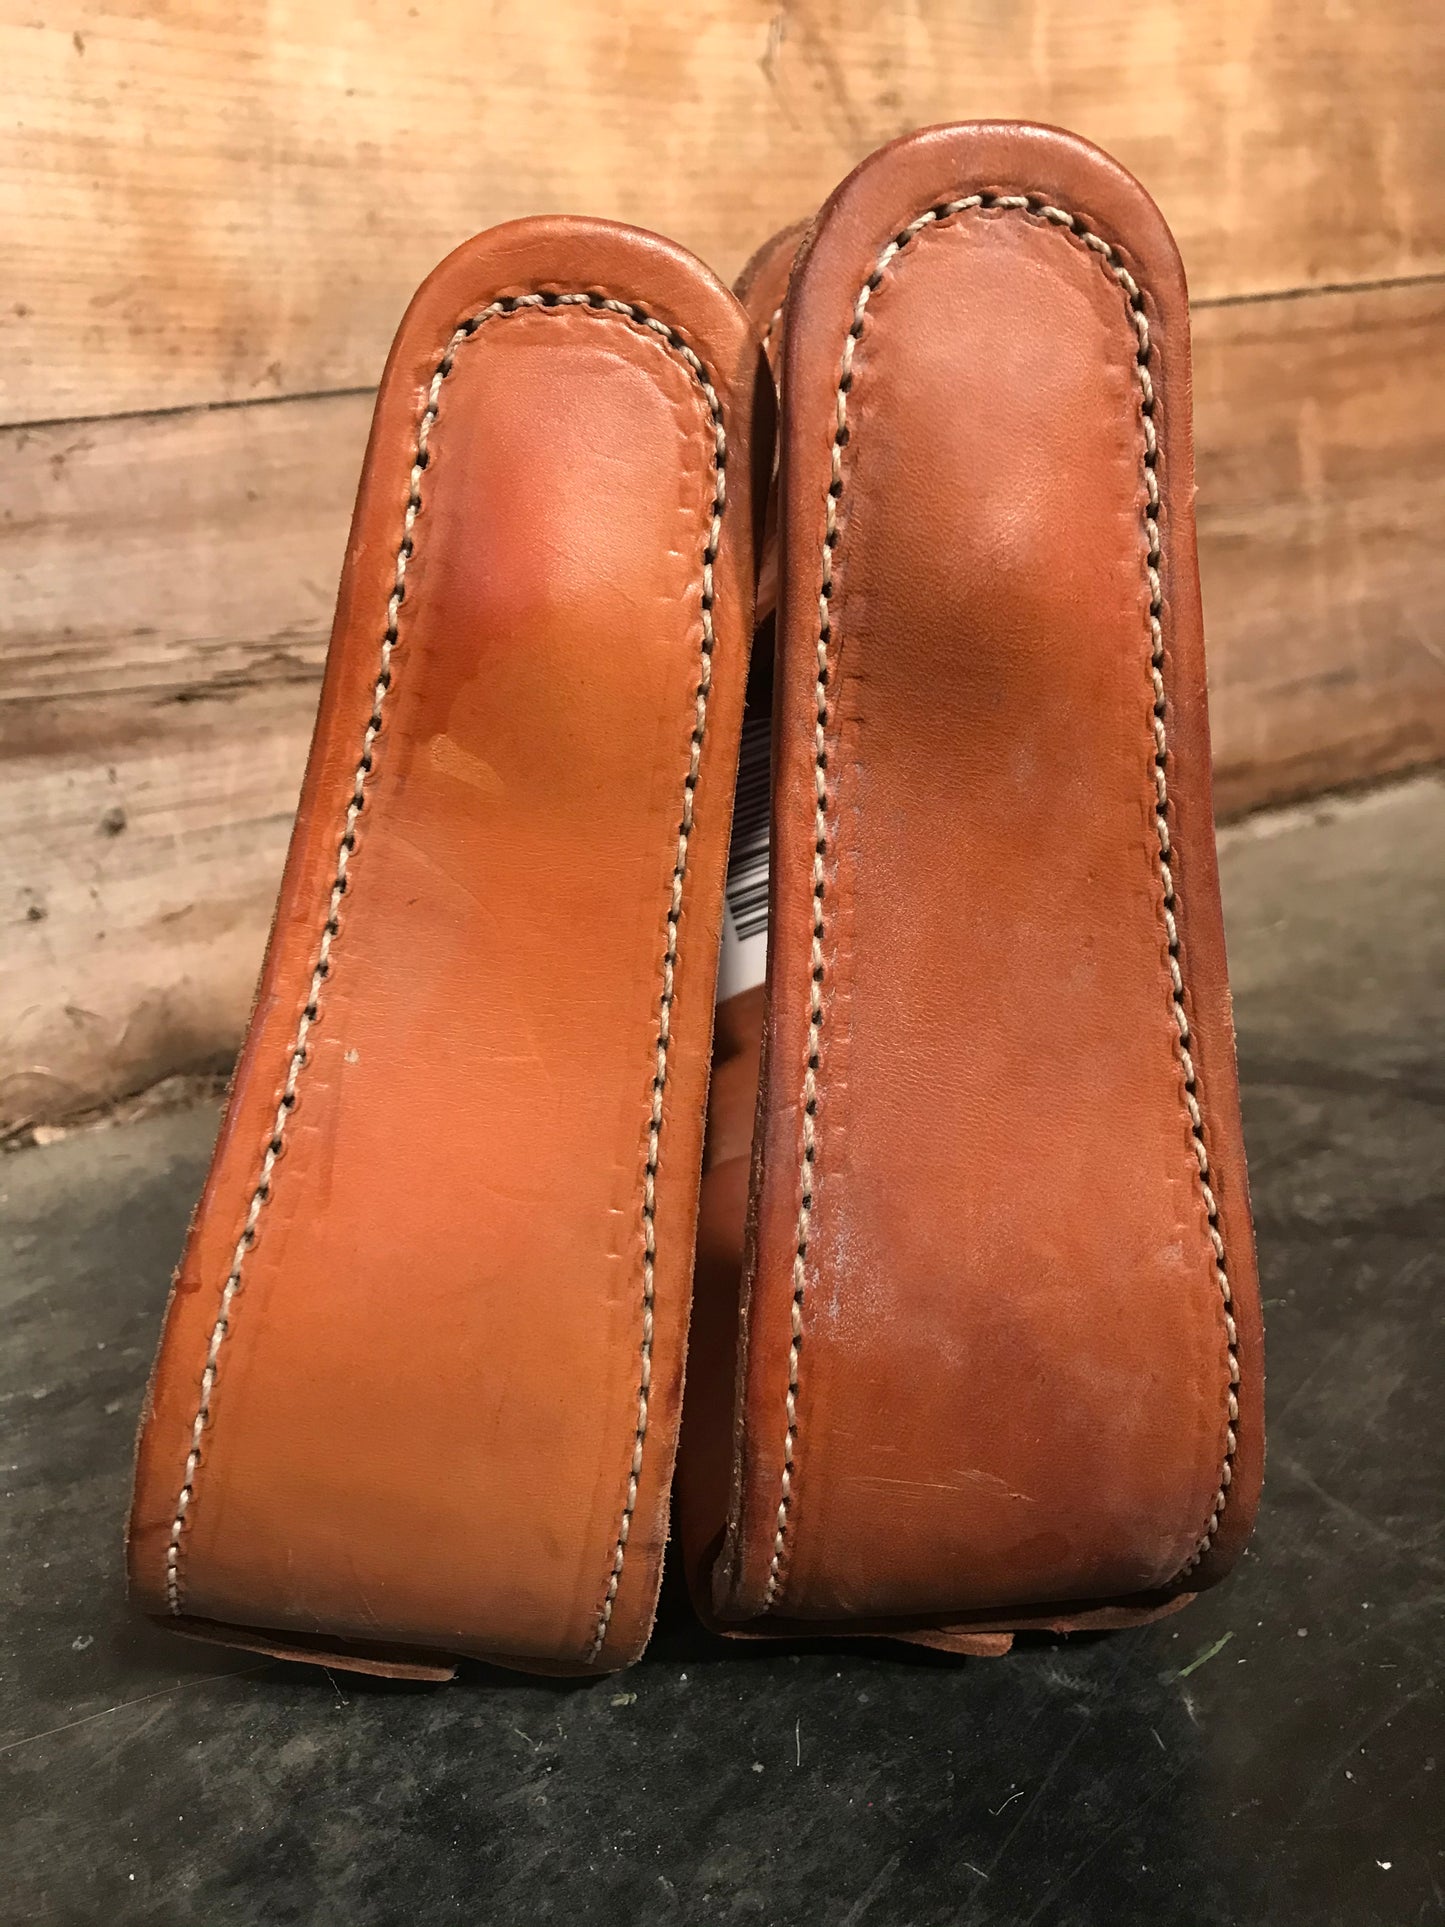 Leather wrapped 3” bell stirrups